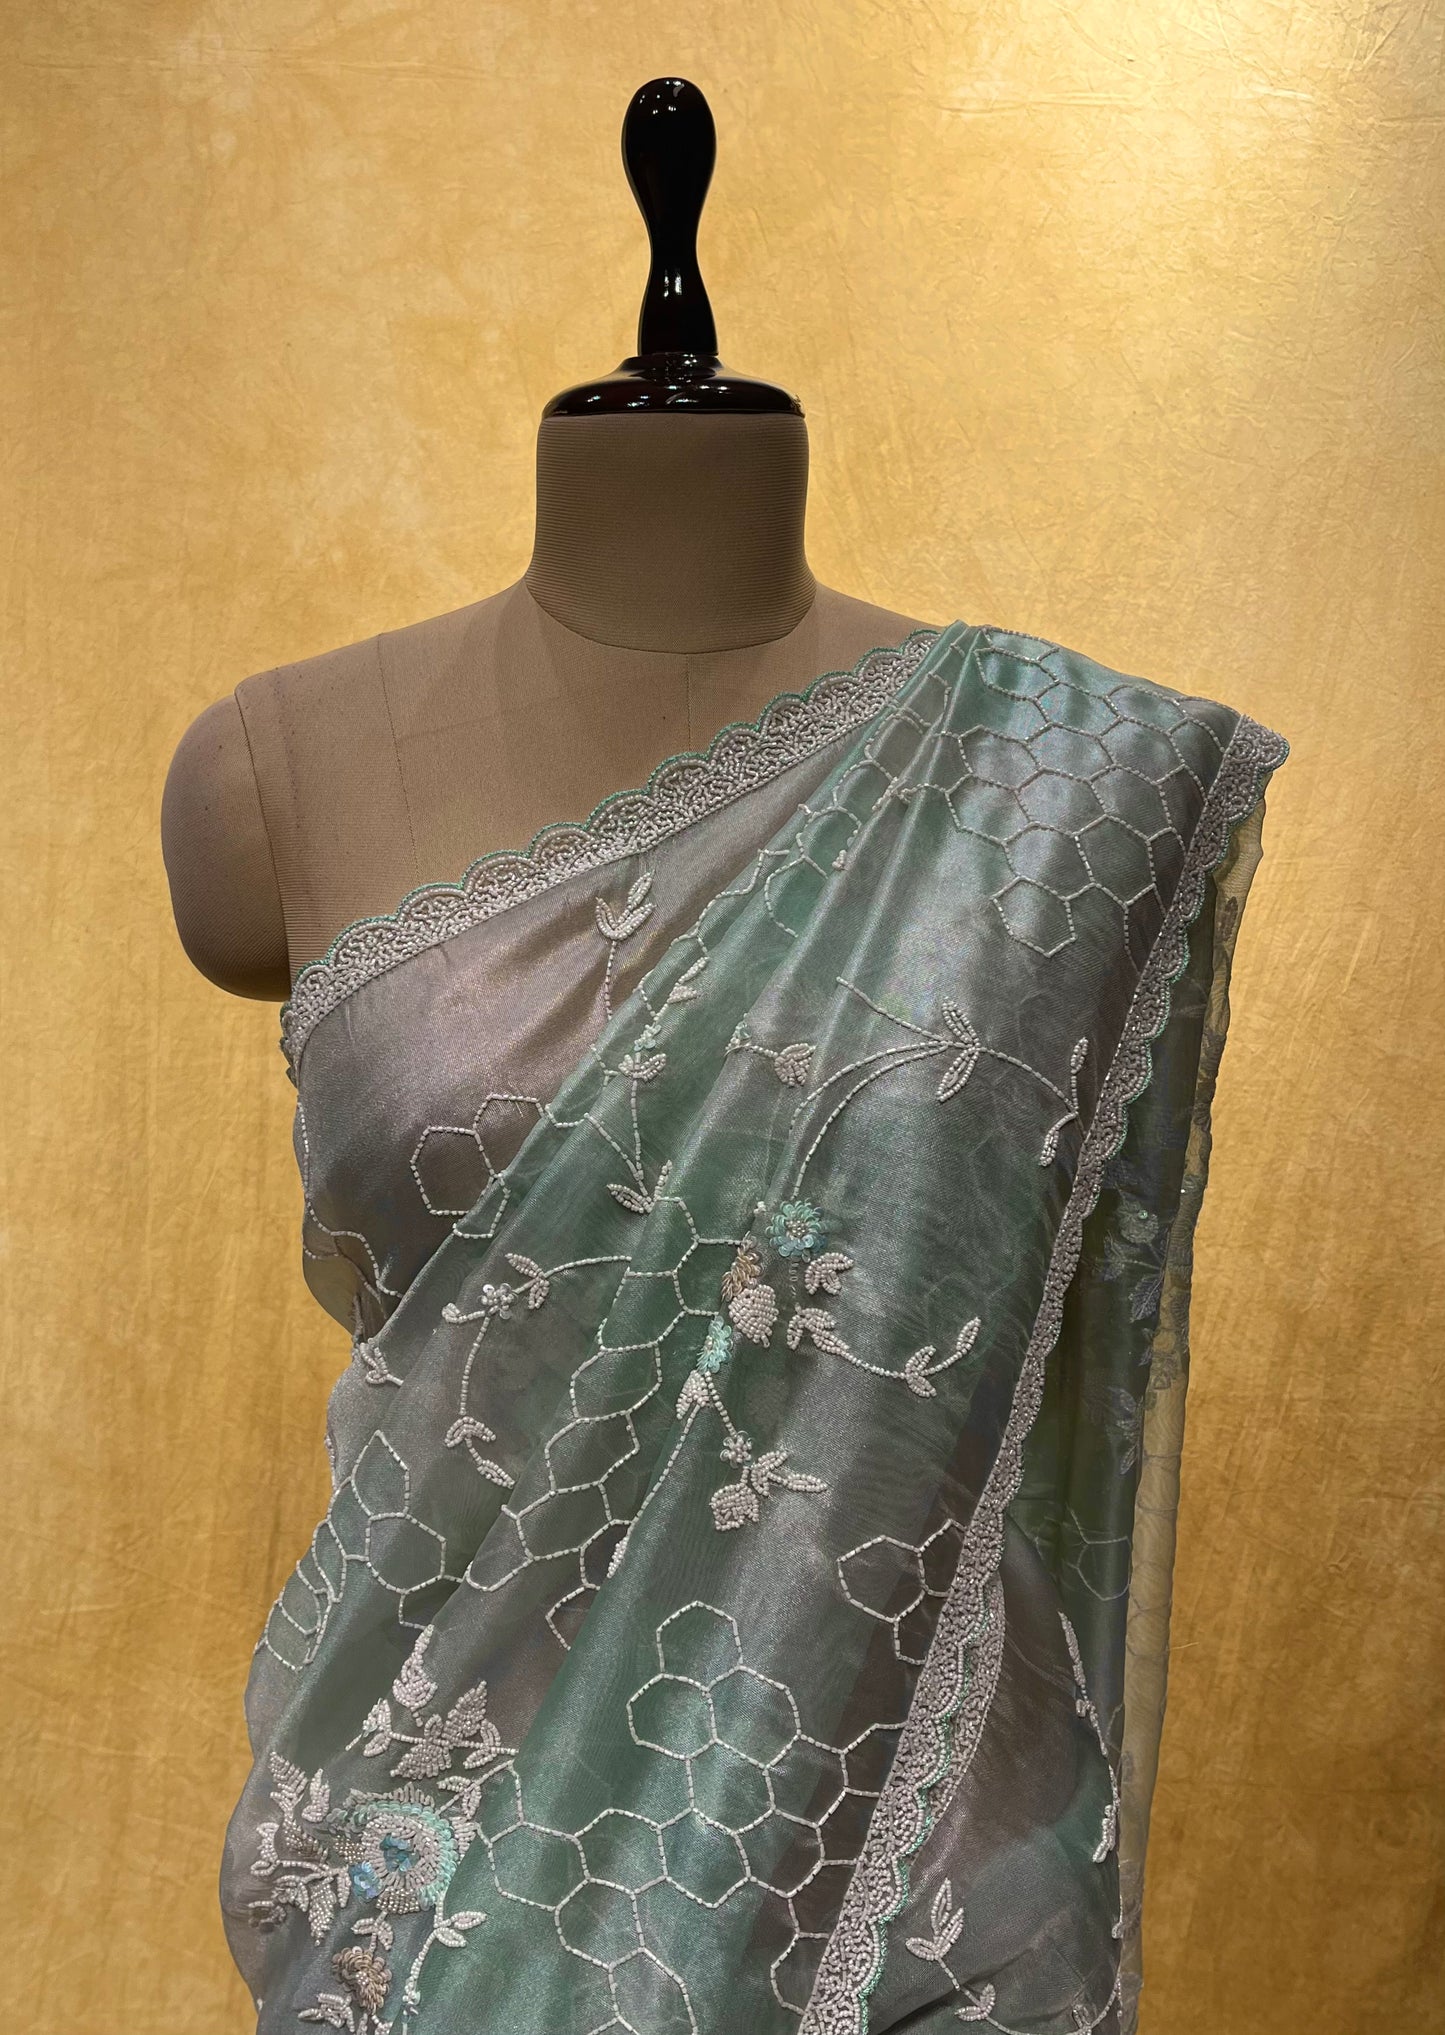 SEA GREEN COLOUR ORGANZA TISSUE HAND EMBROIDERED SAREE EMBELLISHED WITH BEADS & SEQUINS WORK